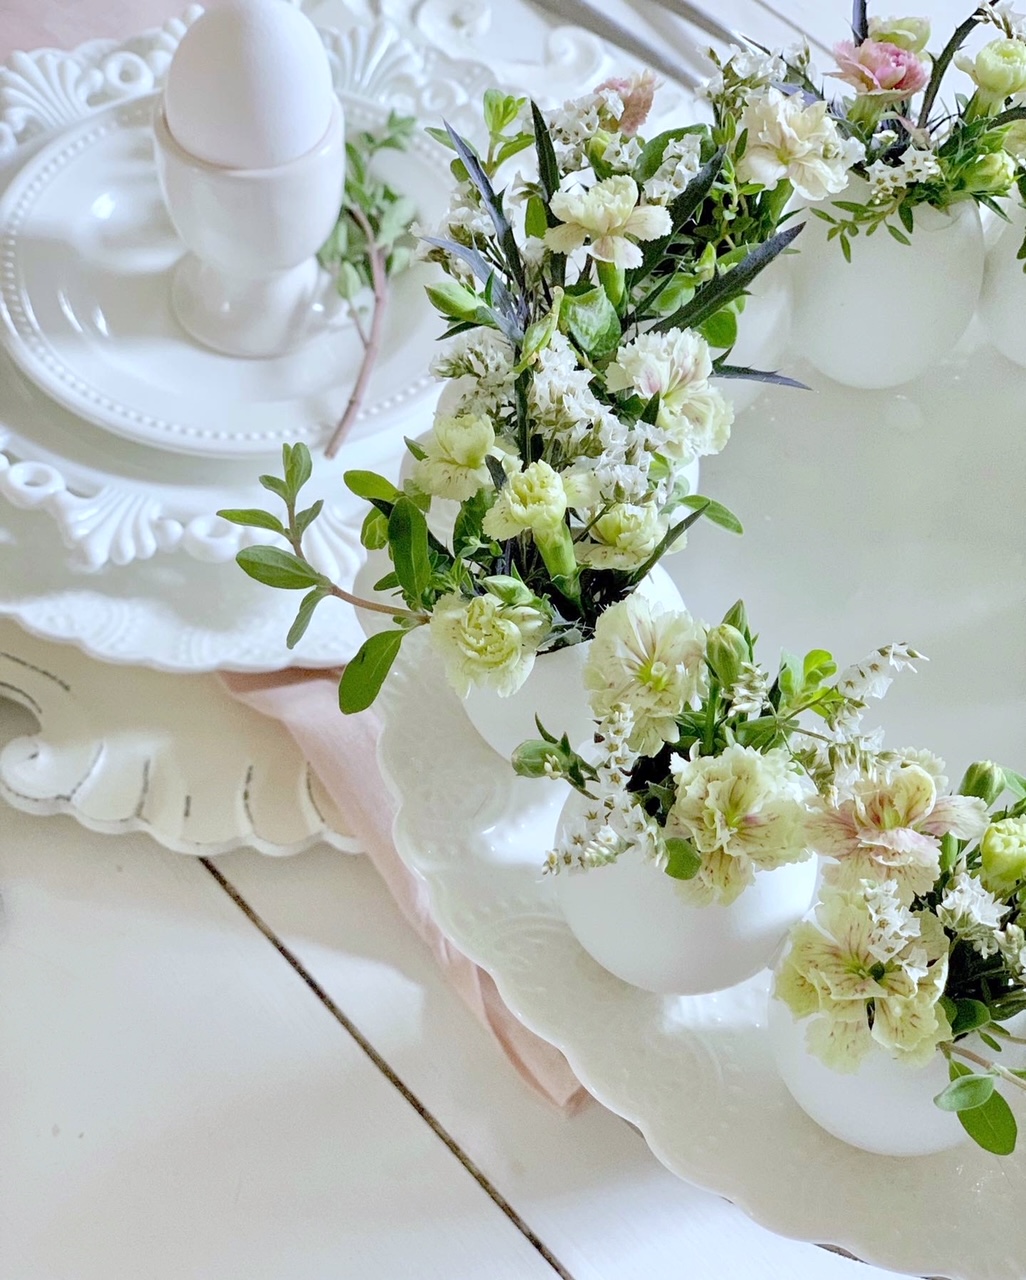 Crafting the Perfect Easter Centerpiece: Easy on a Budget